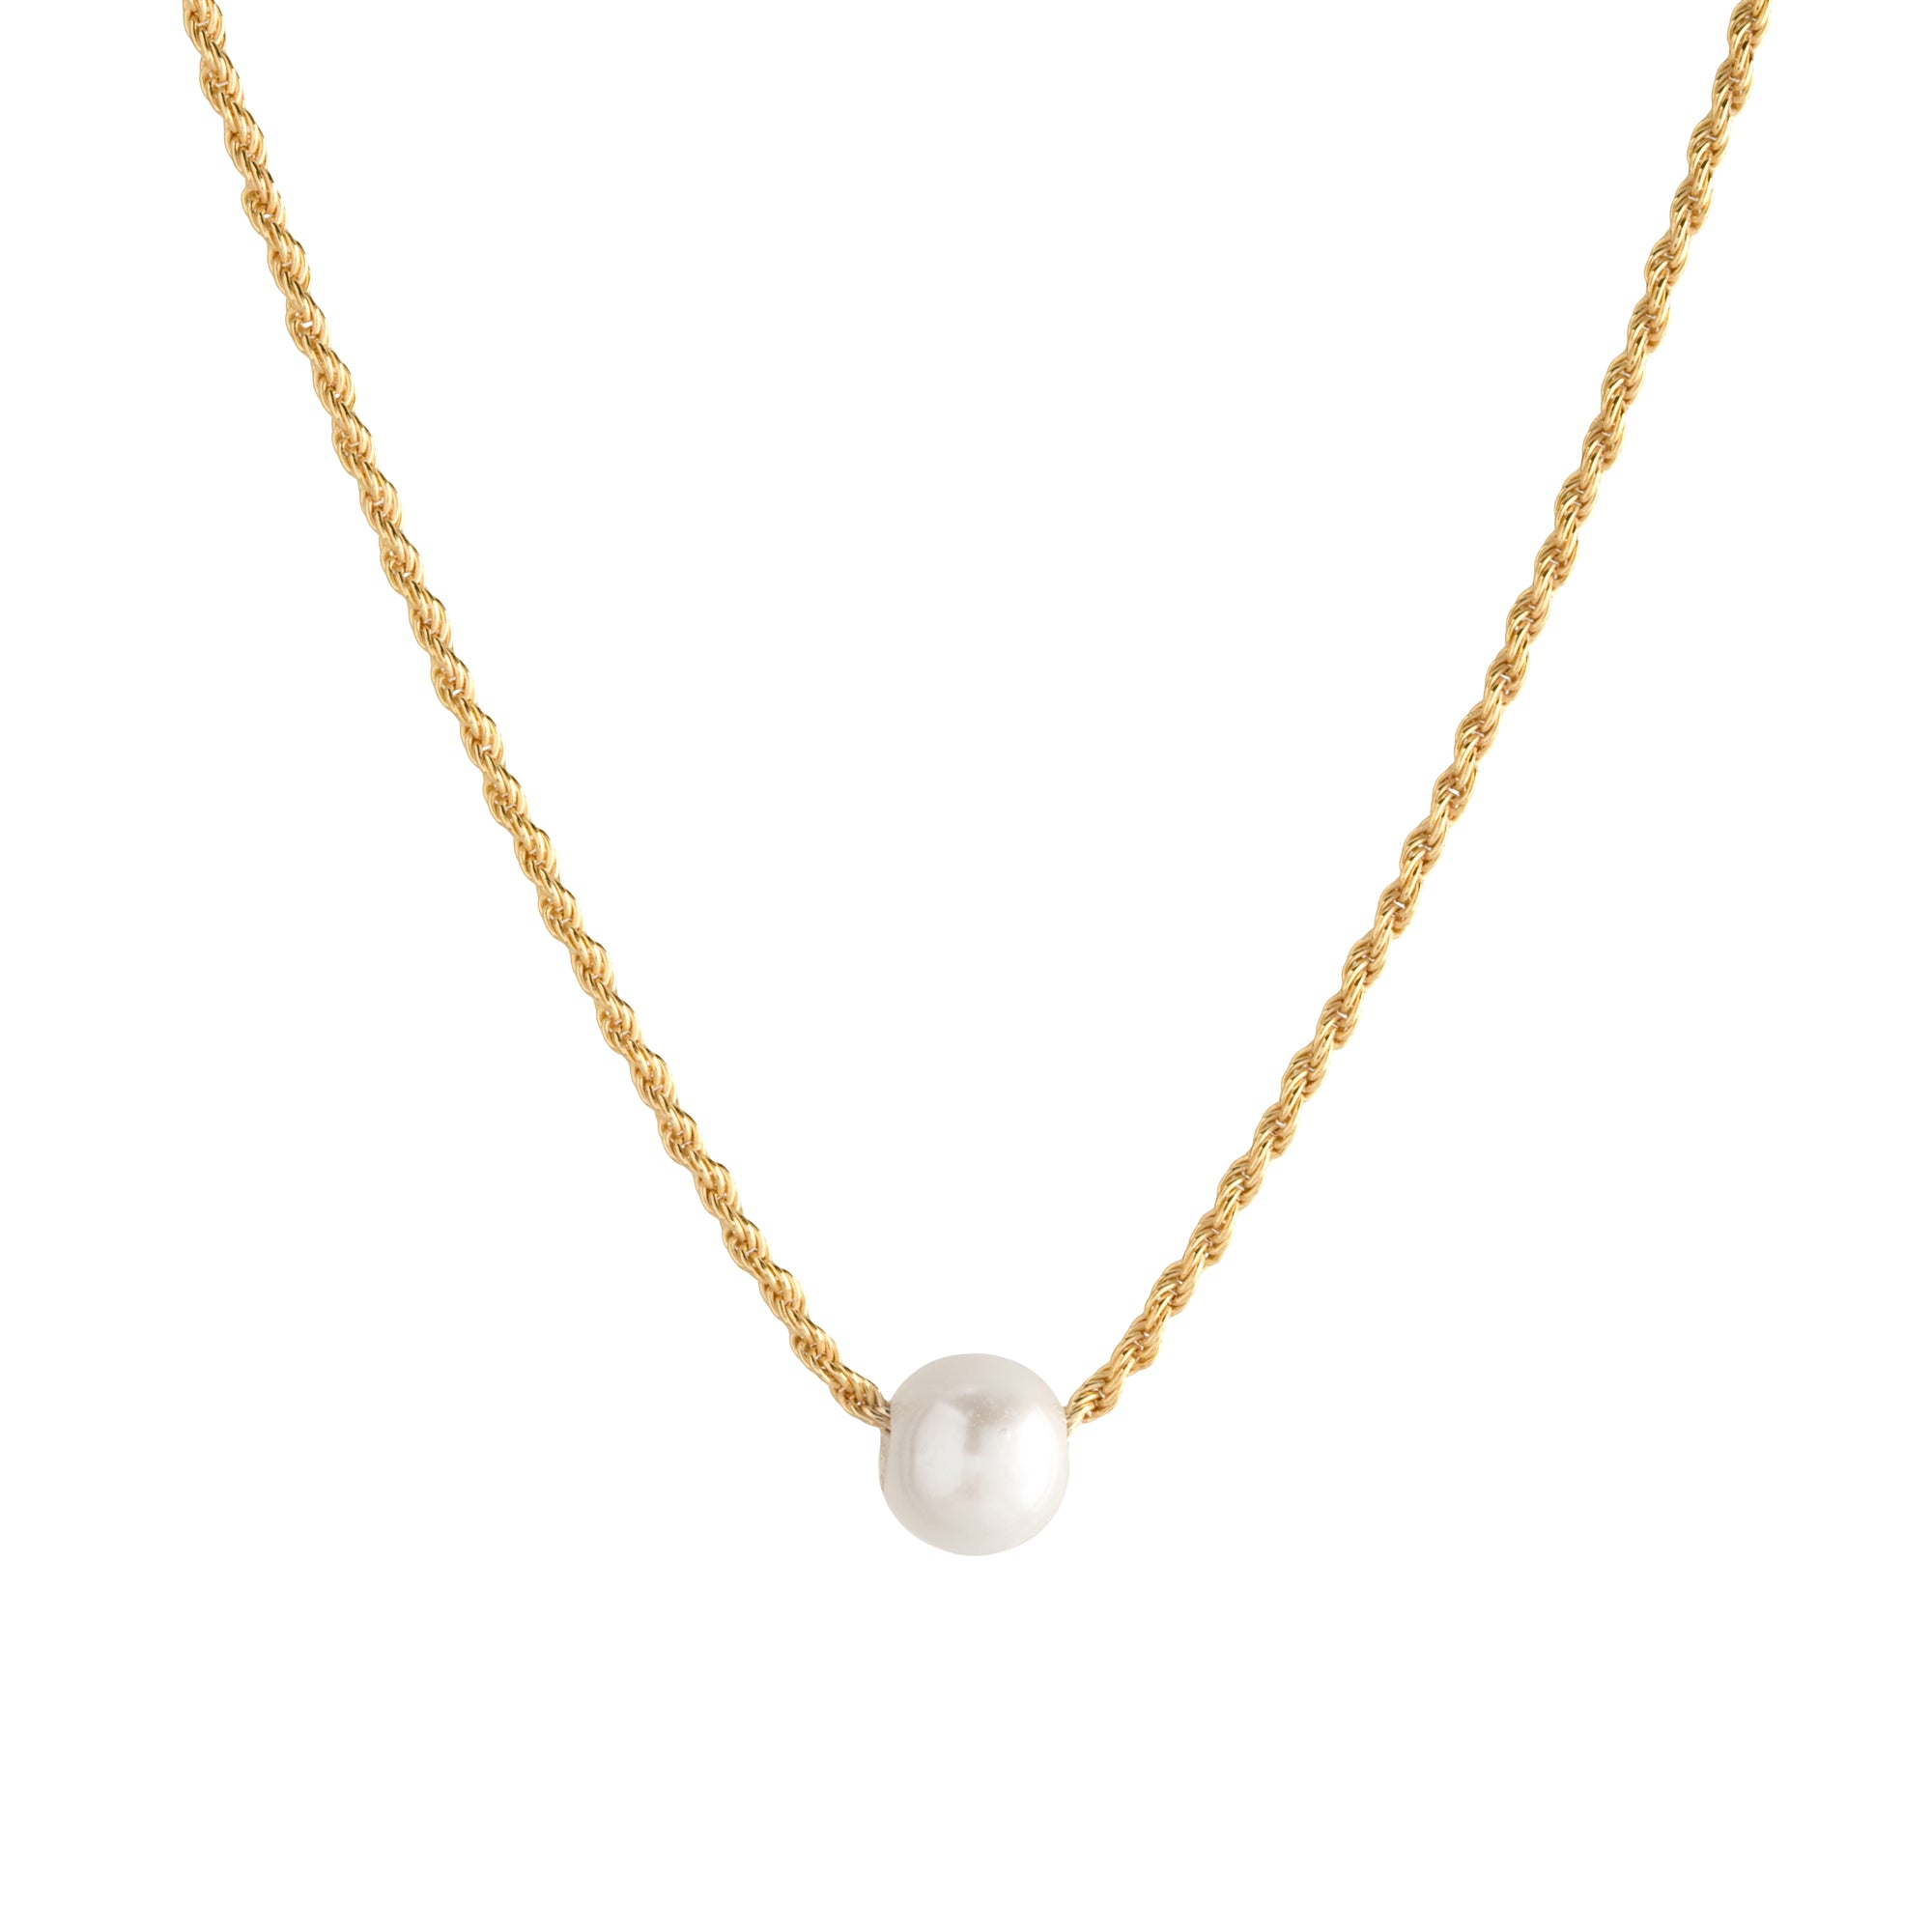 Large floating freshwater pearl on rope chain